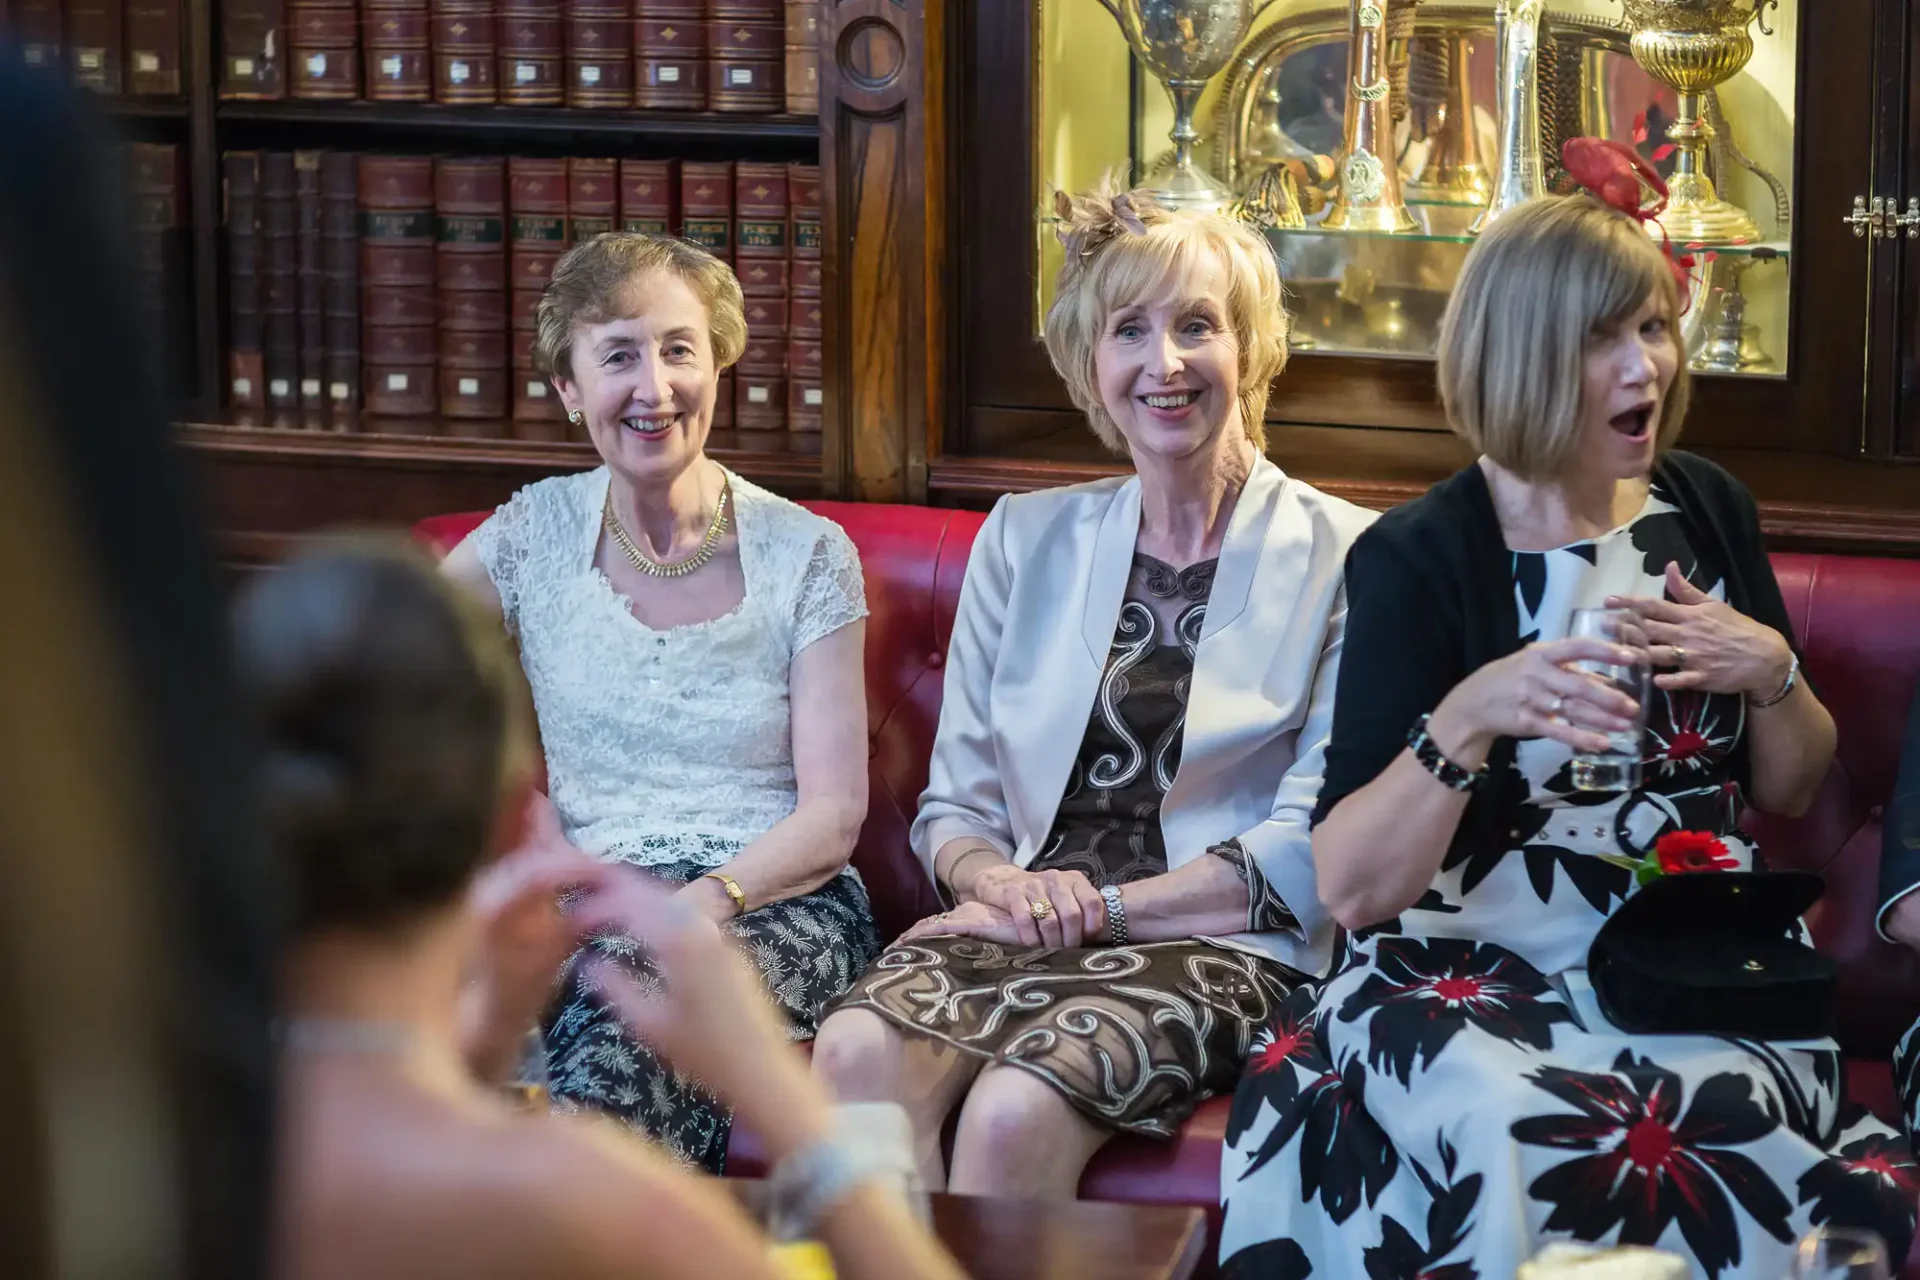 Three older women seated in a library, smiling and engaged in conversation at a social gathering, elegantly dressed.